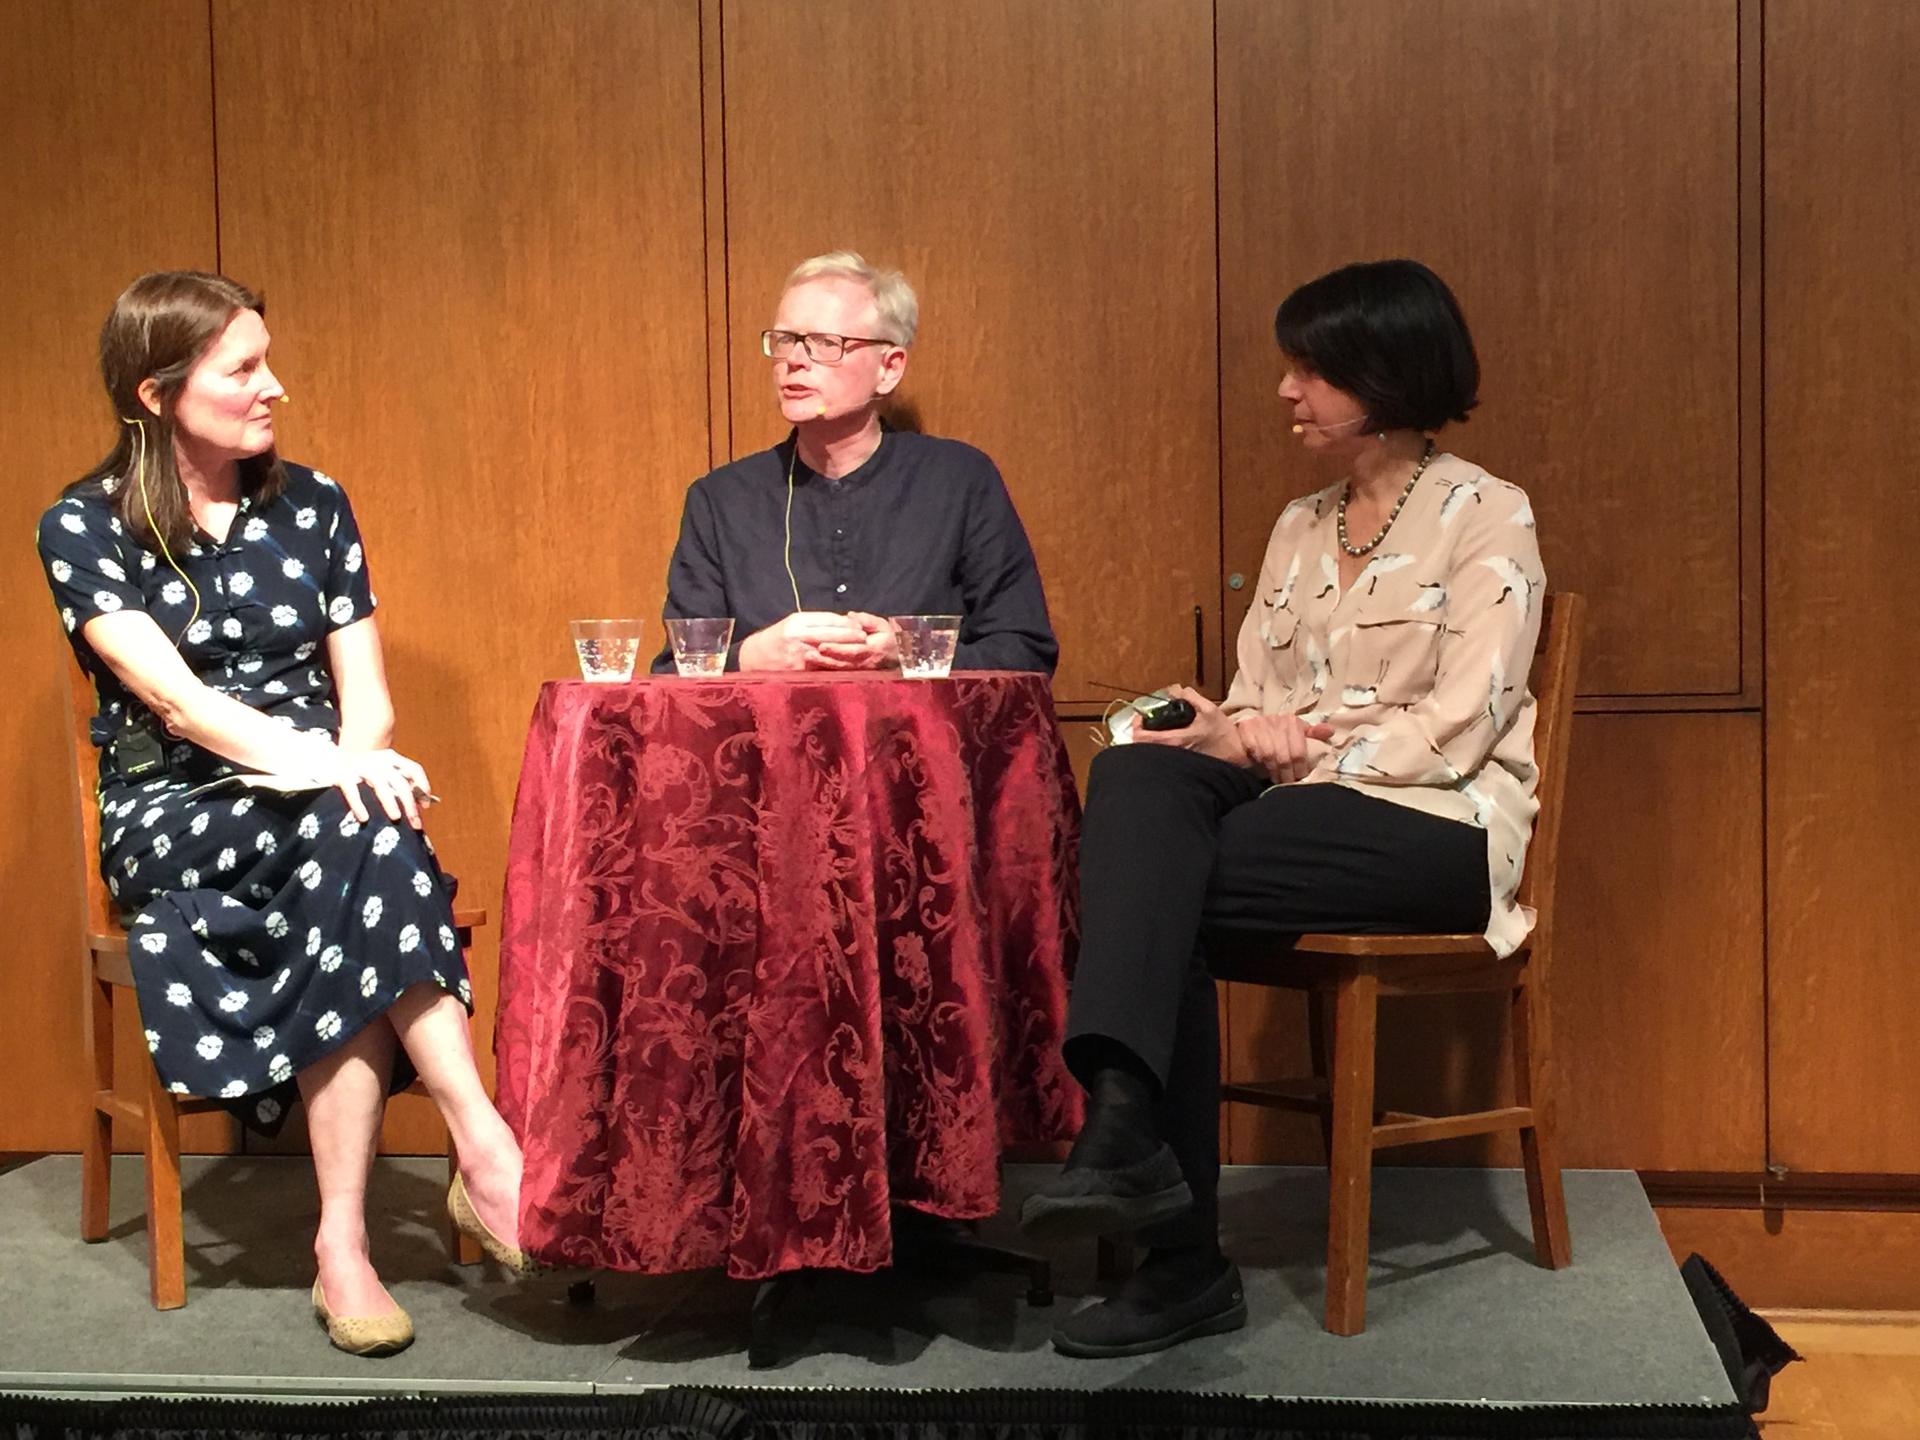 Mary Kay Magistad (left),host of the Whose Century Is It? podcast, with Ian Johnson, author of "The Souls of China," and Jennifer Lin, author of "Shanghai Faithful," at The Mechanics Institute in San Francisco.